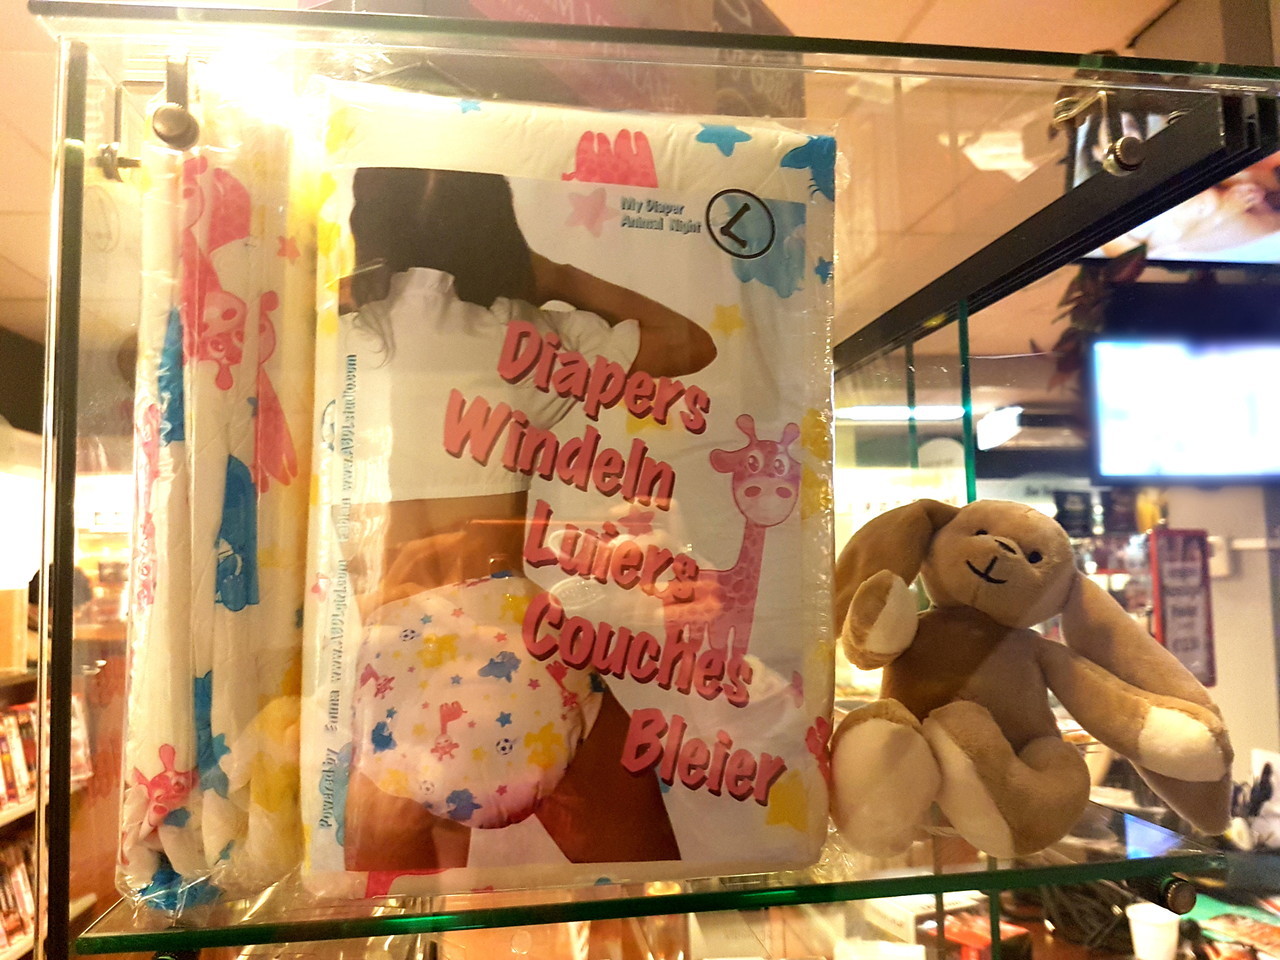 Guess what I saw at Erotica Boutique in Amersfoort? Diapers! Yessss&hellip;.